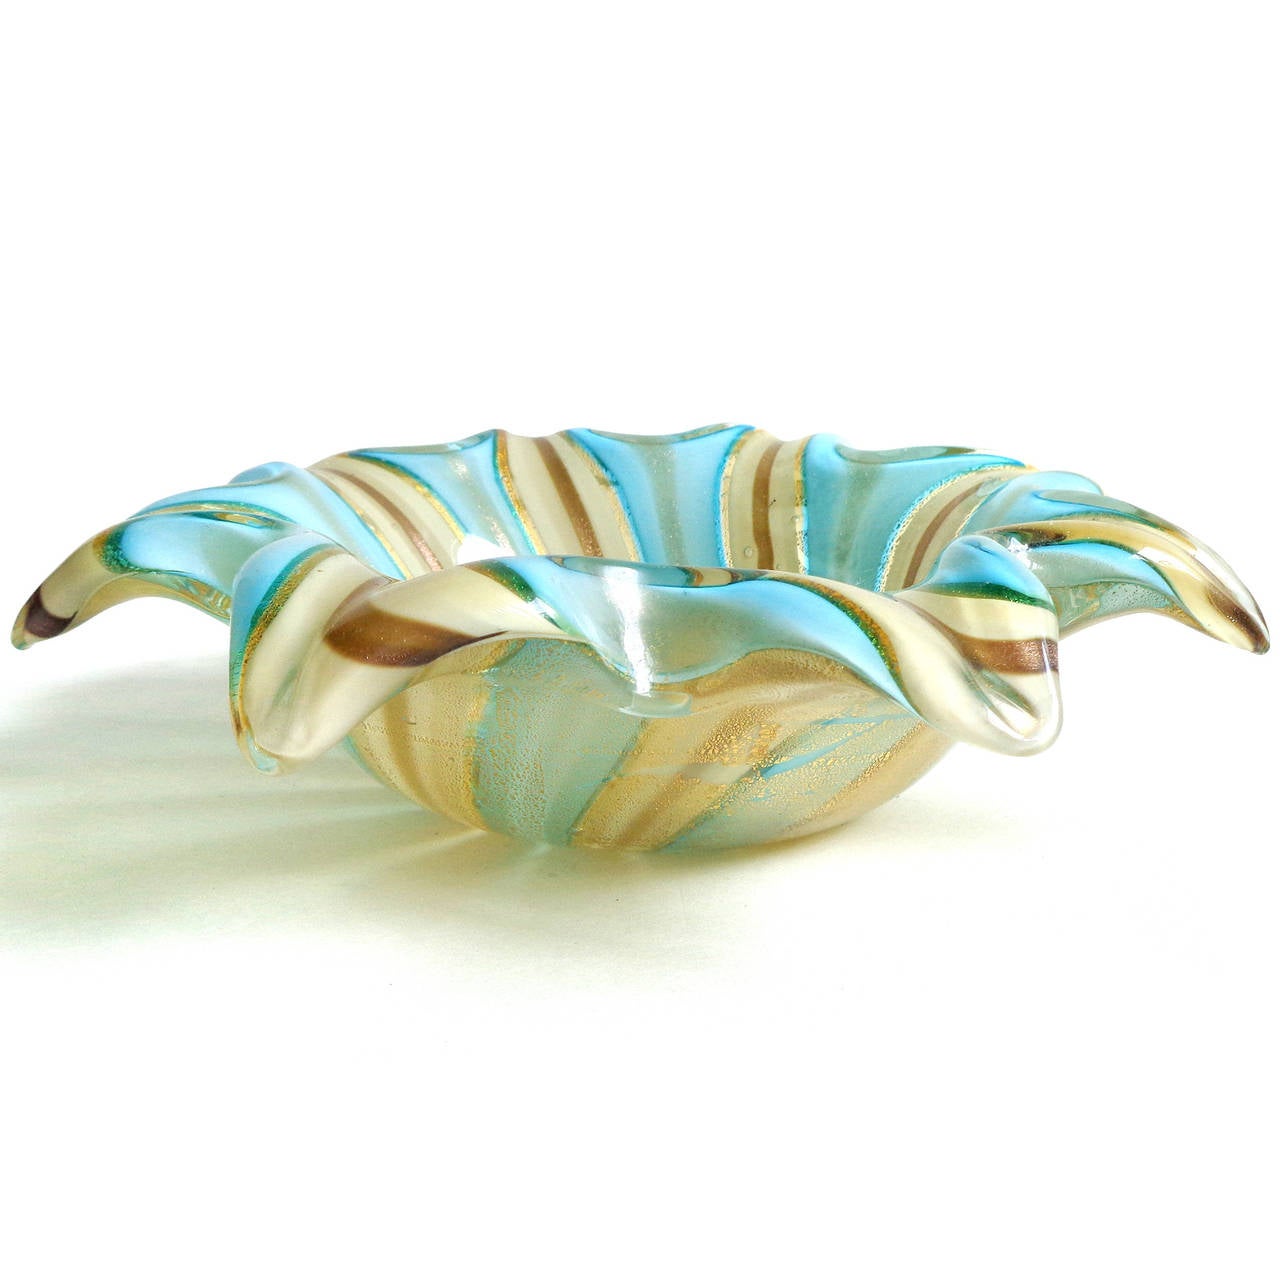 Free shipping worldwide! See details below description.

Gorgeous Murano handblown blue, cream, gold and aventurine flecks art glass starfish shaped bowl. Attributed to designer Dino Martens for Aureliano Toso. The bowl is made up of very large